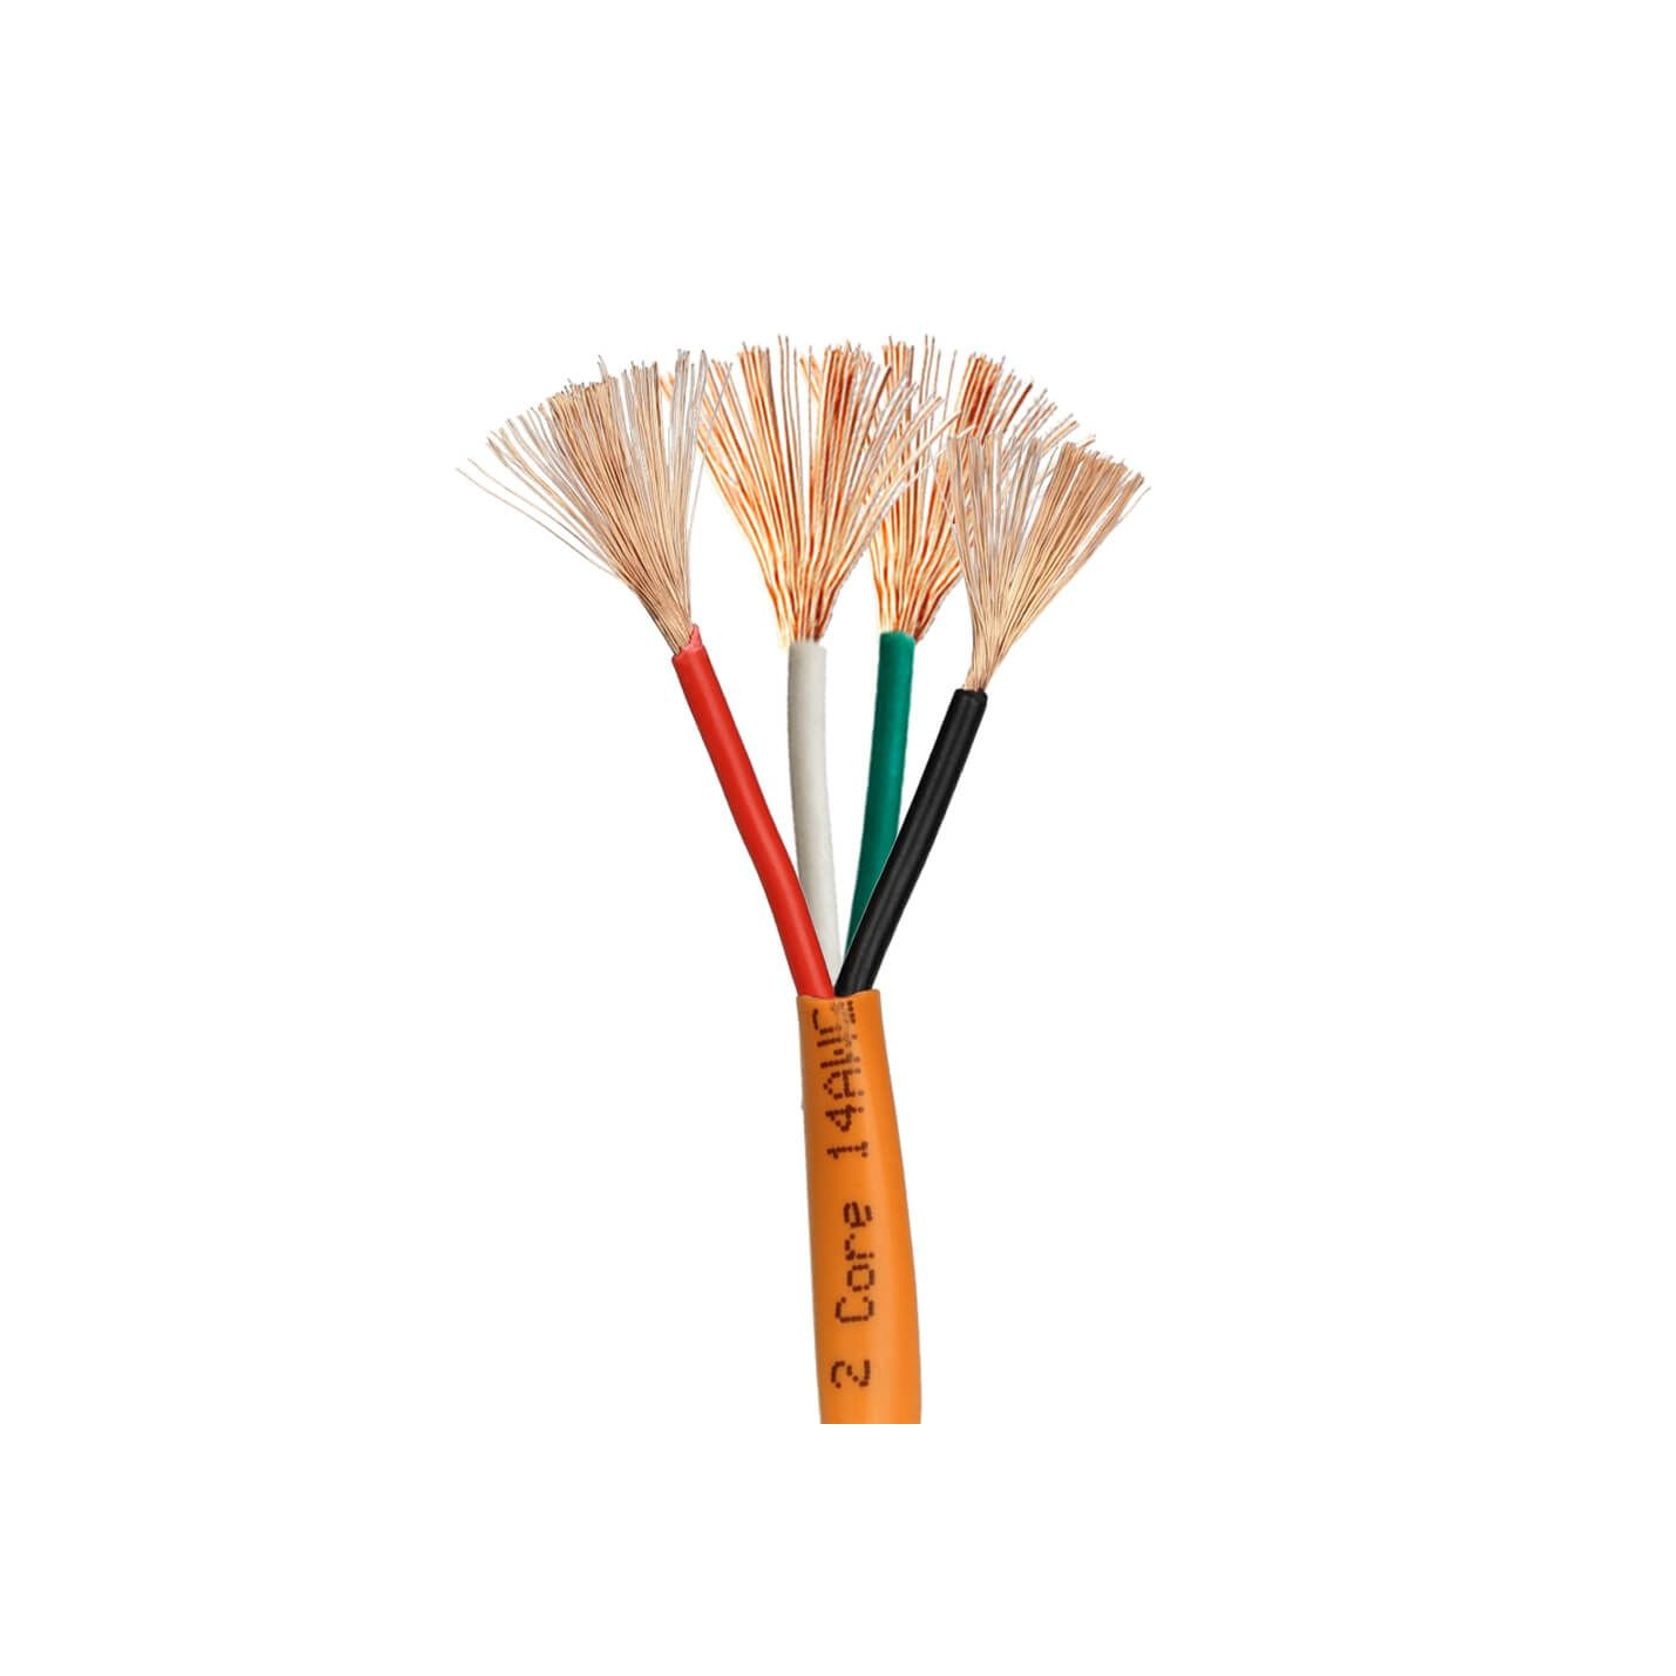 Home Theatre Premium In-Wall Speaker Cable - 4 Core 14AWG - 50m - Fire Rated gallery detail image